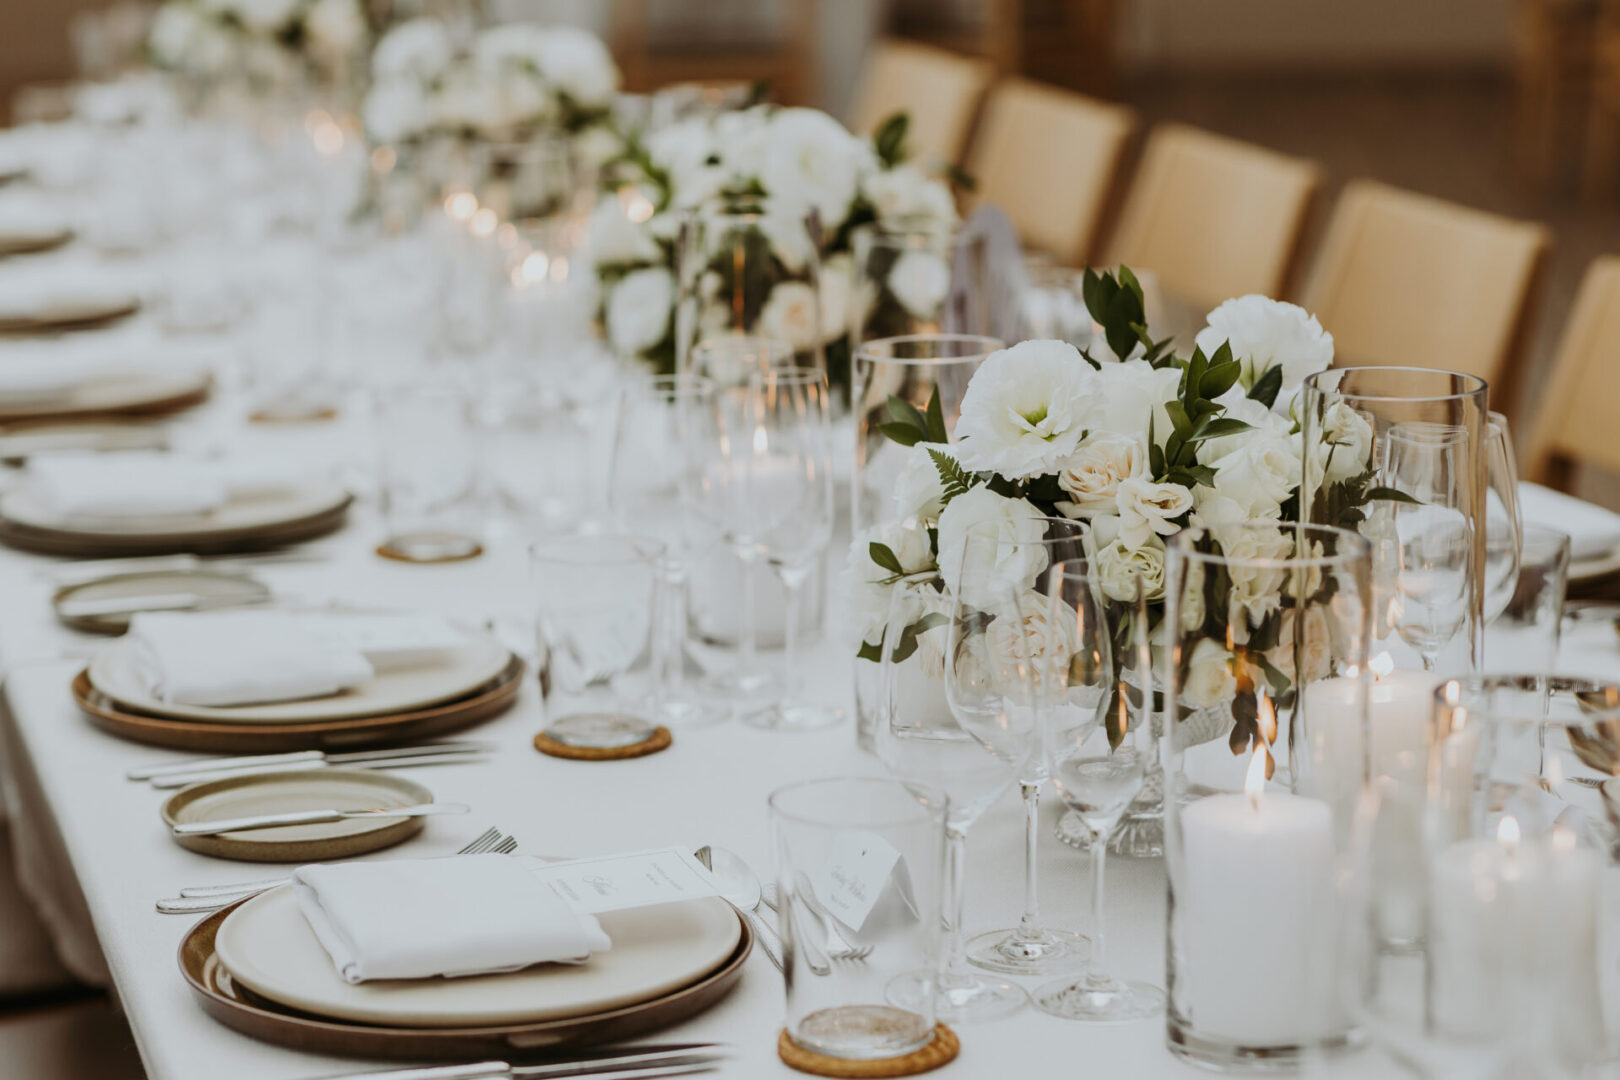 A long table with white flowers and plates